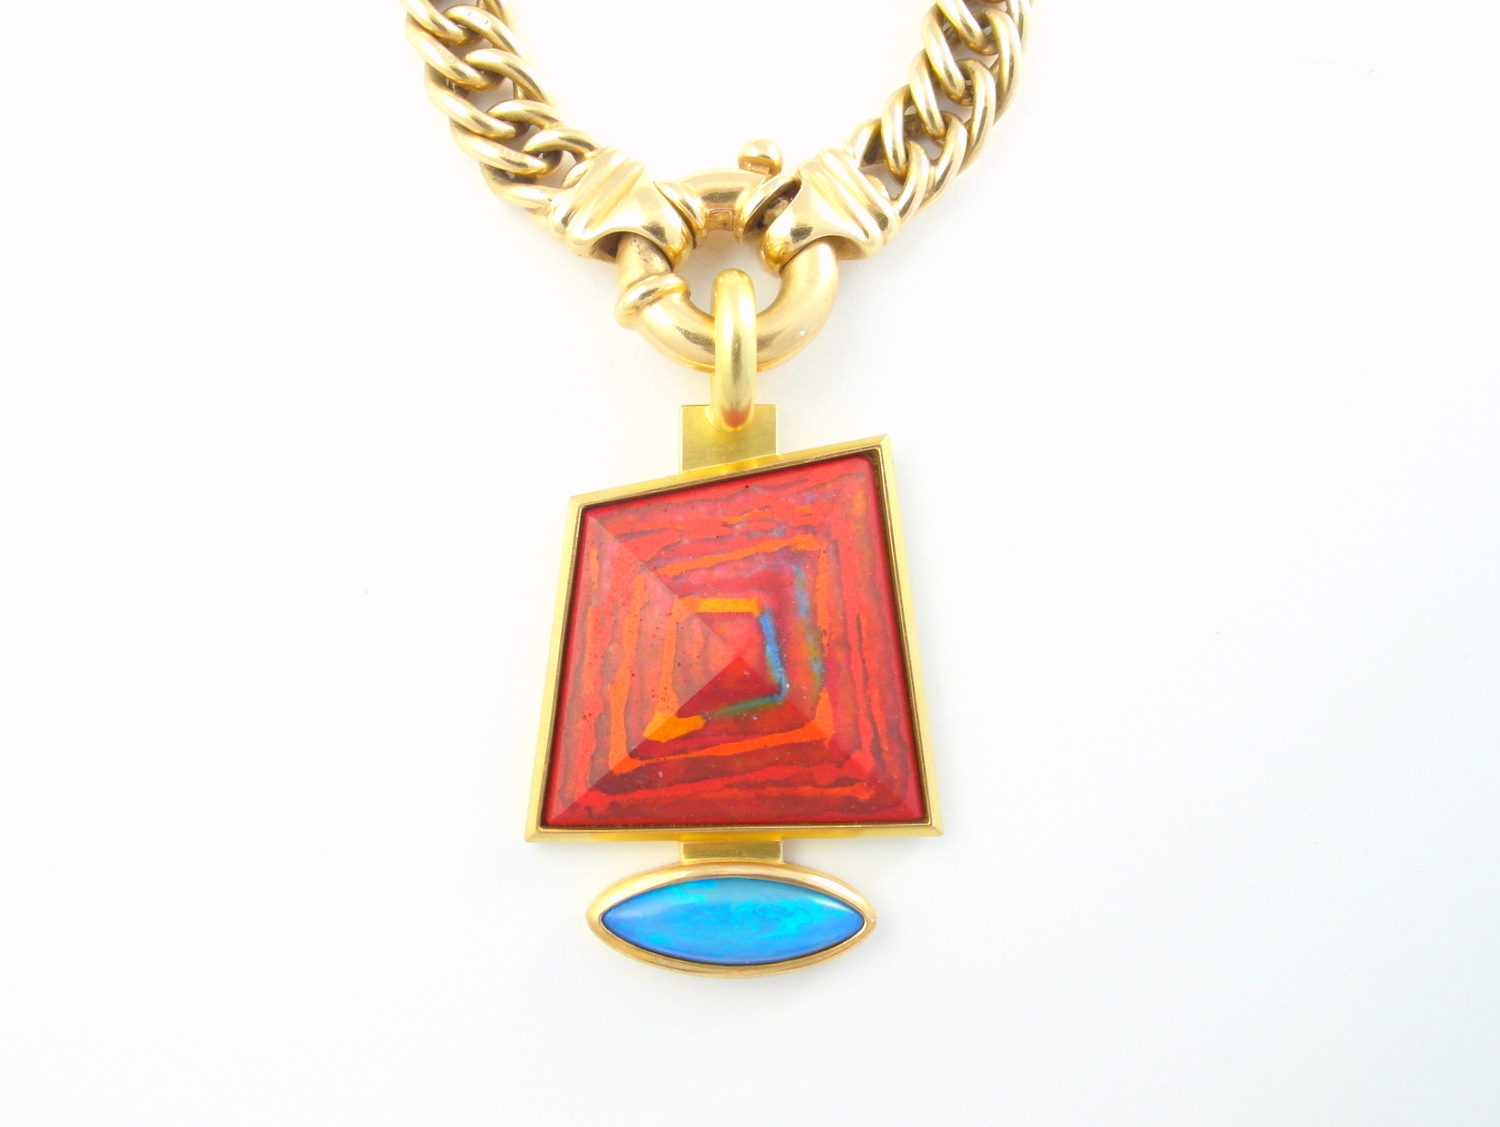  June's pendant 2013 - 18ct yellow gold, enamel, turquoise (Private collection) 